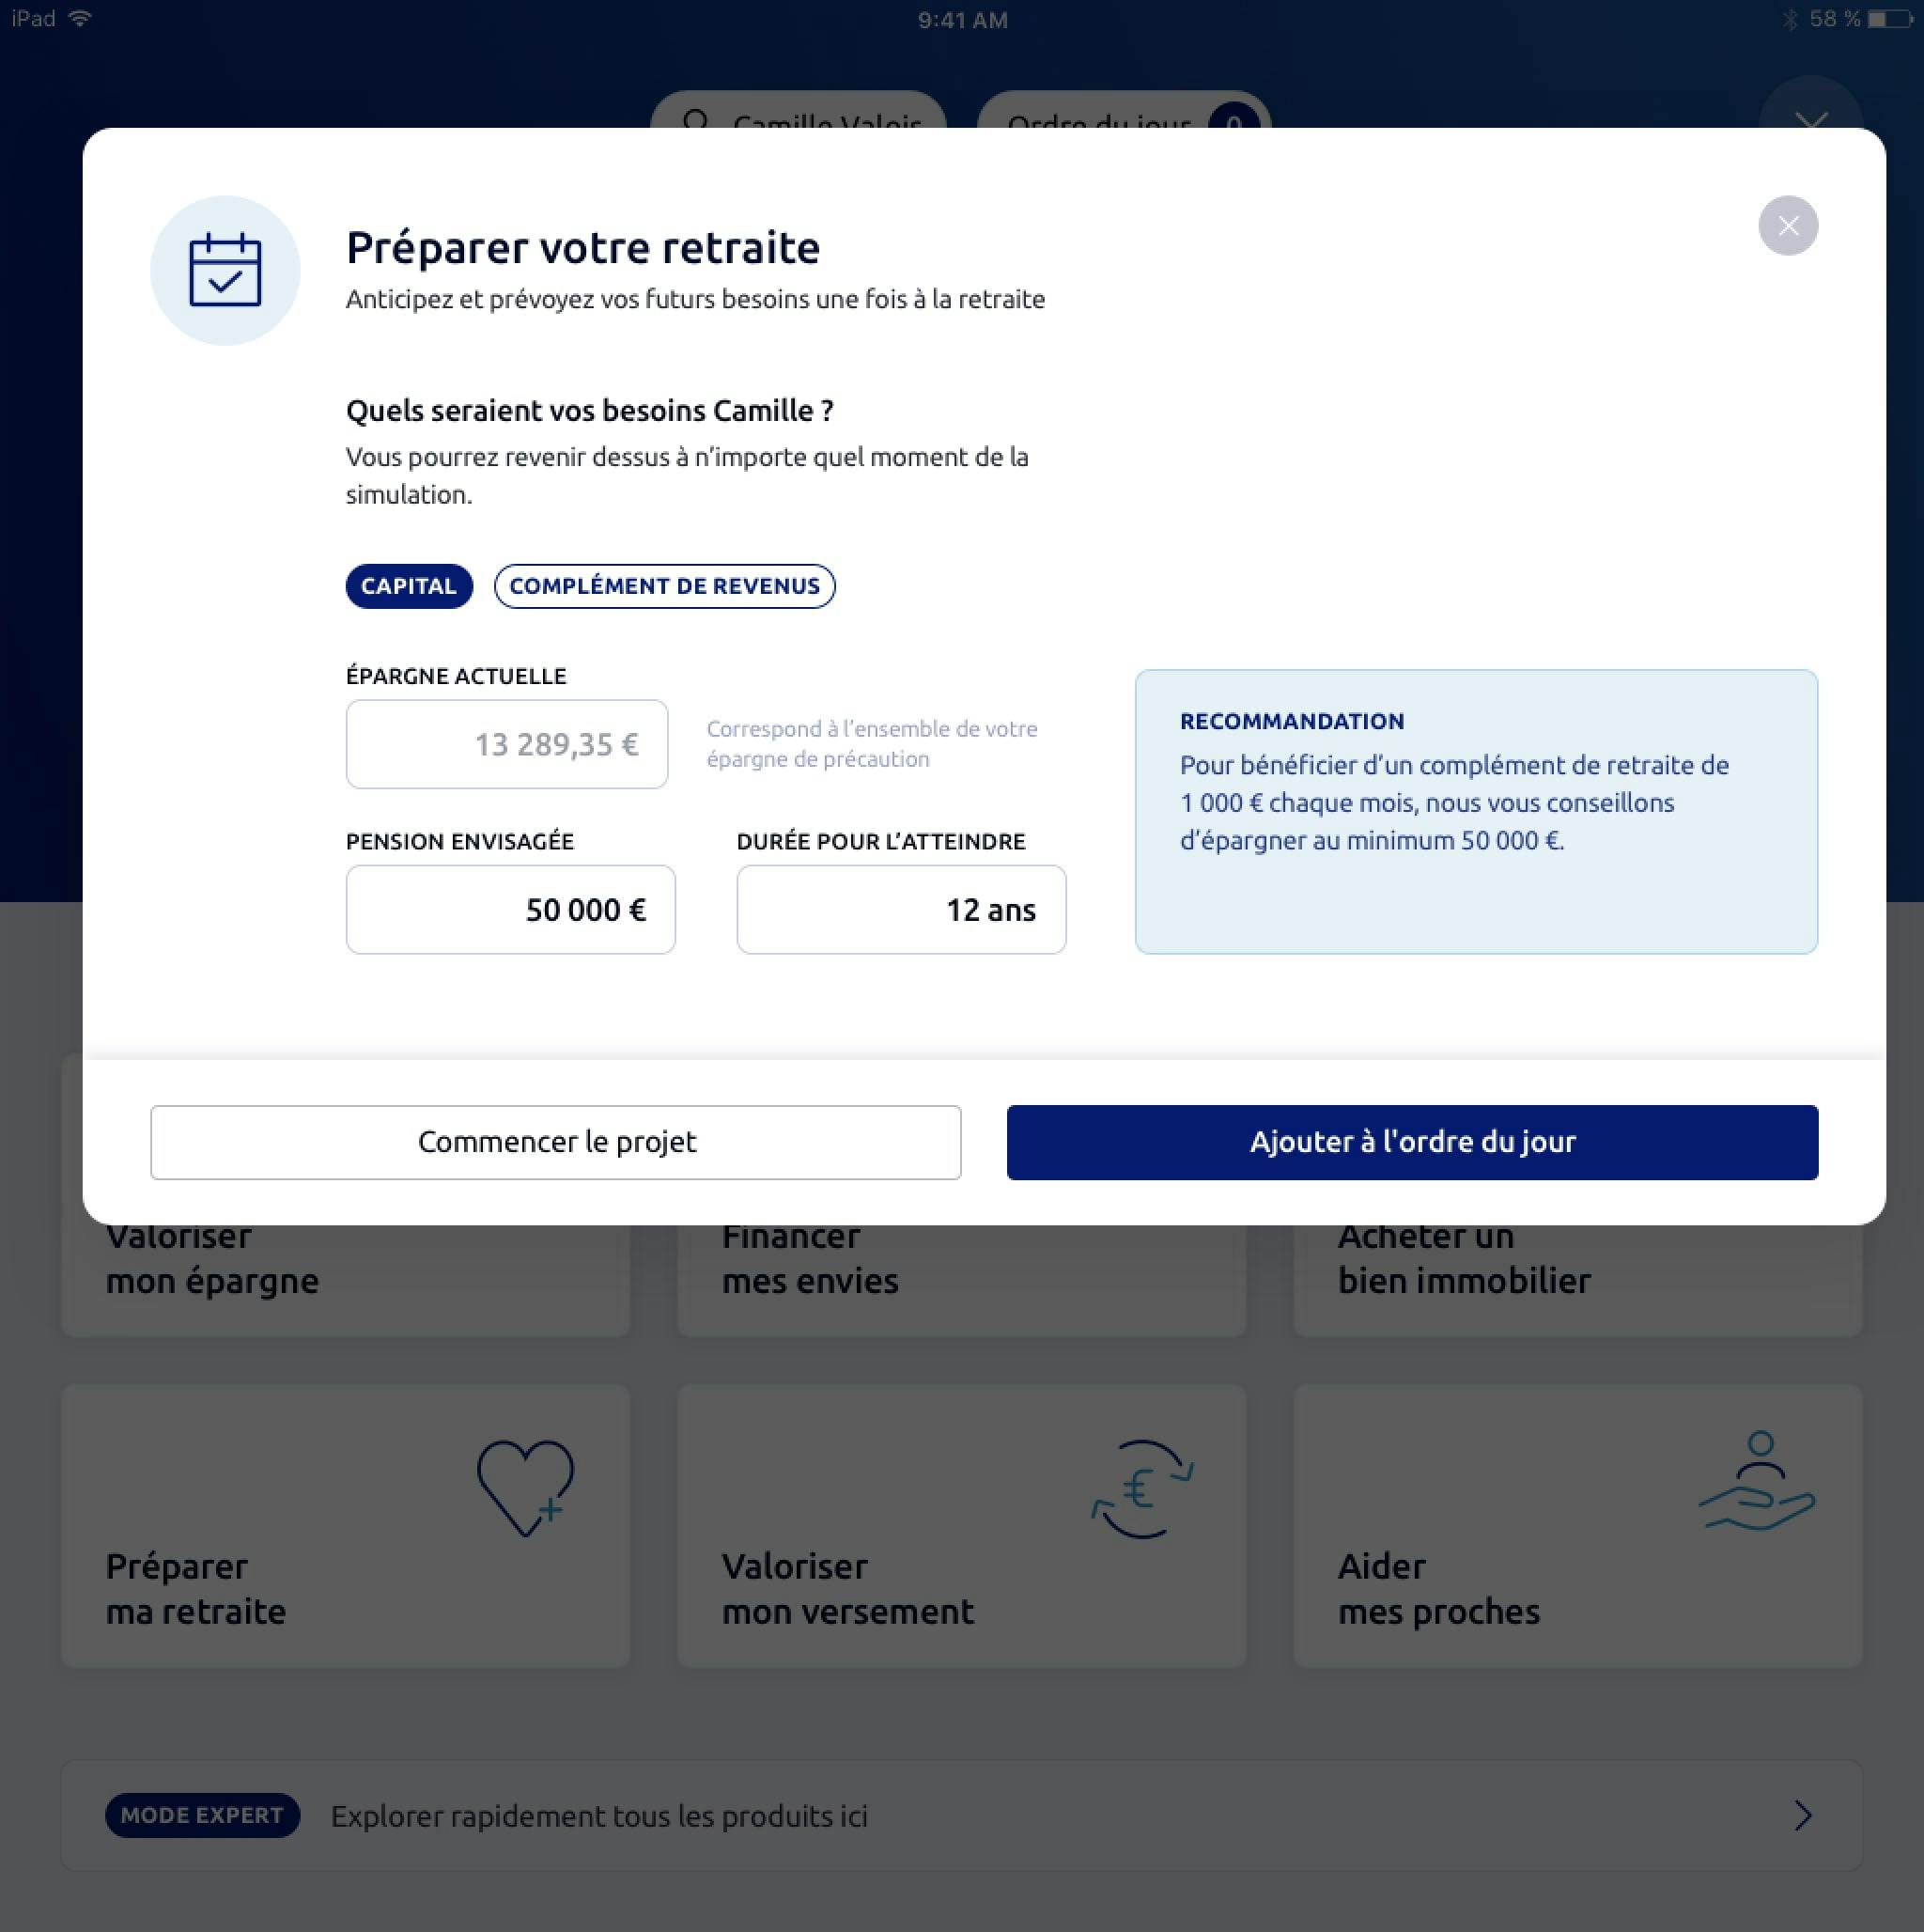 Redesign of the application for banking advisors